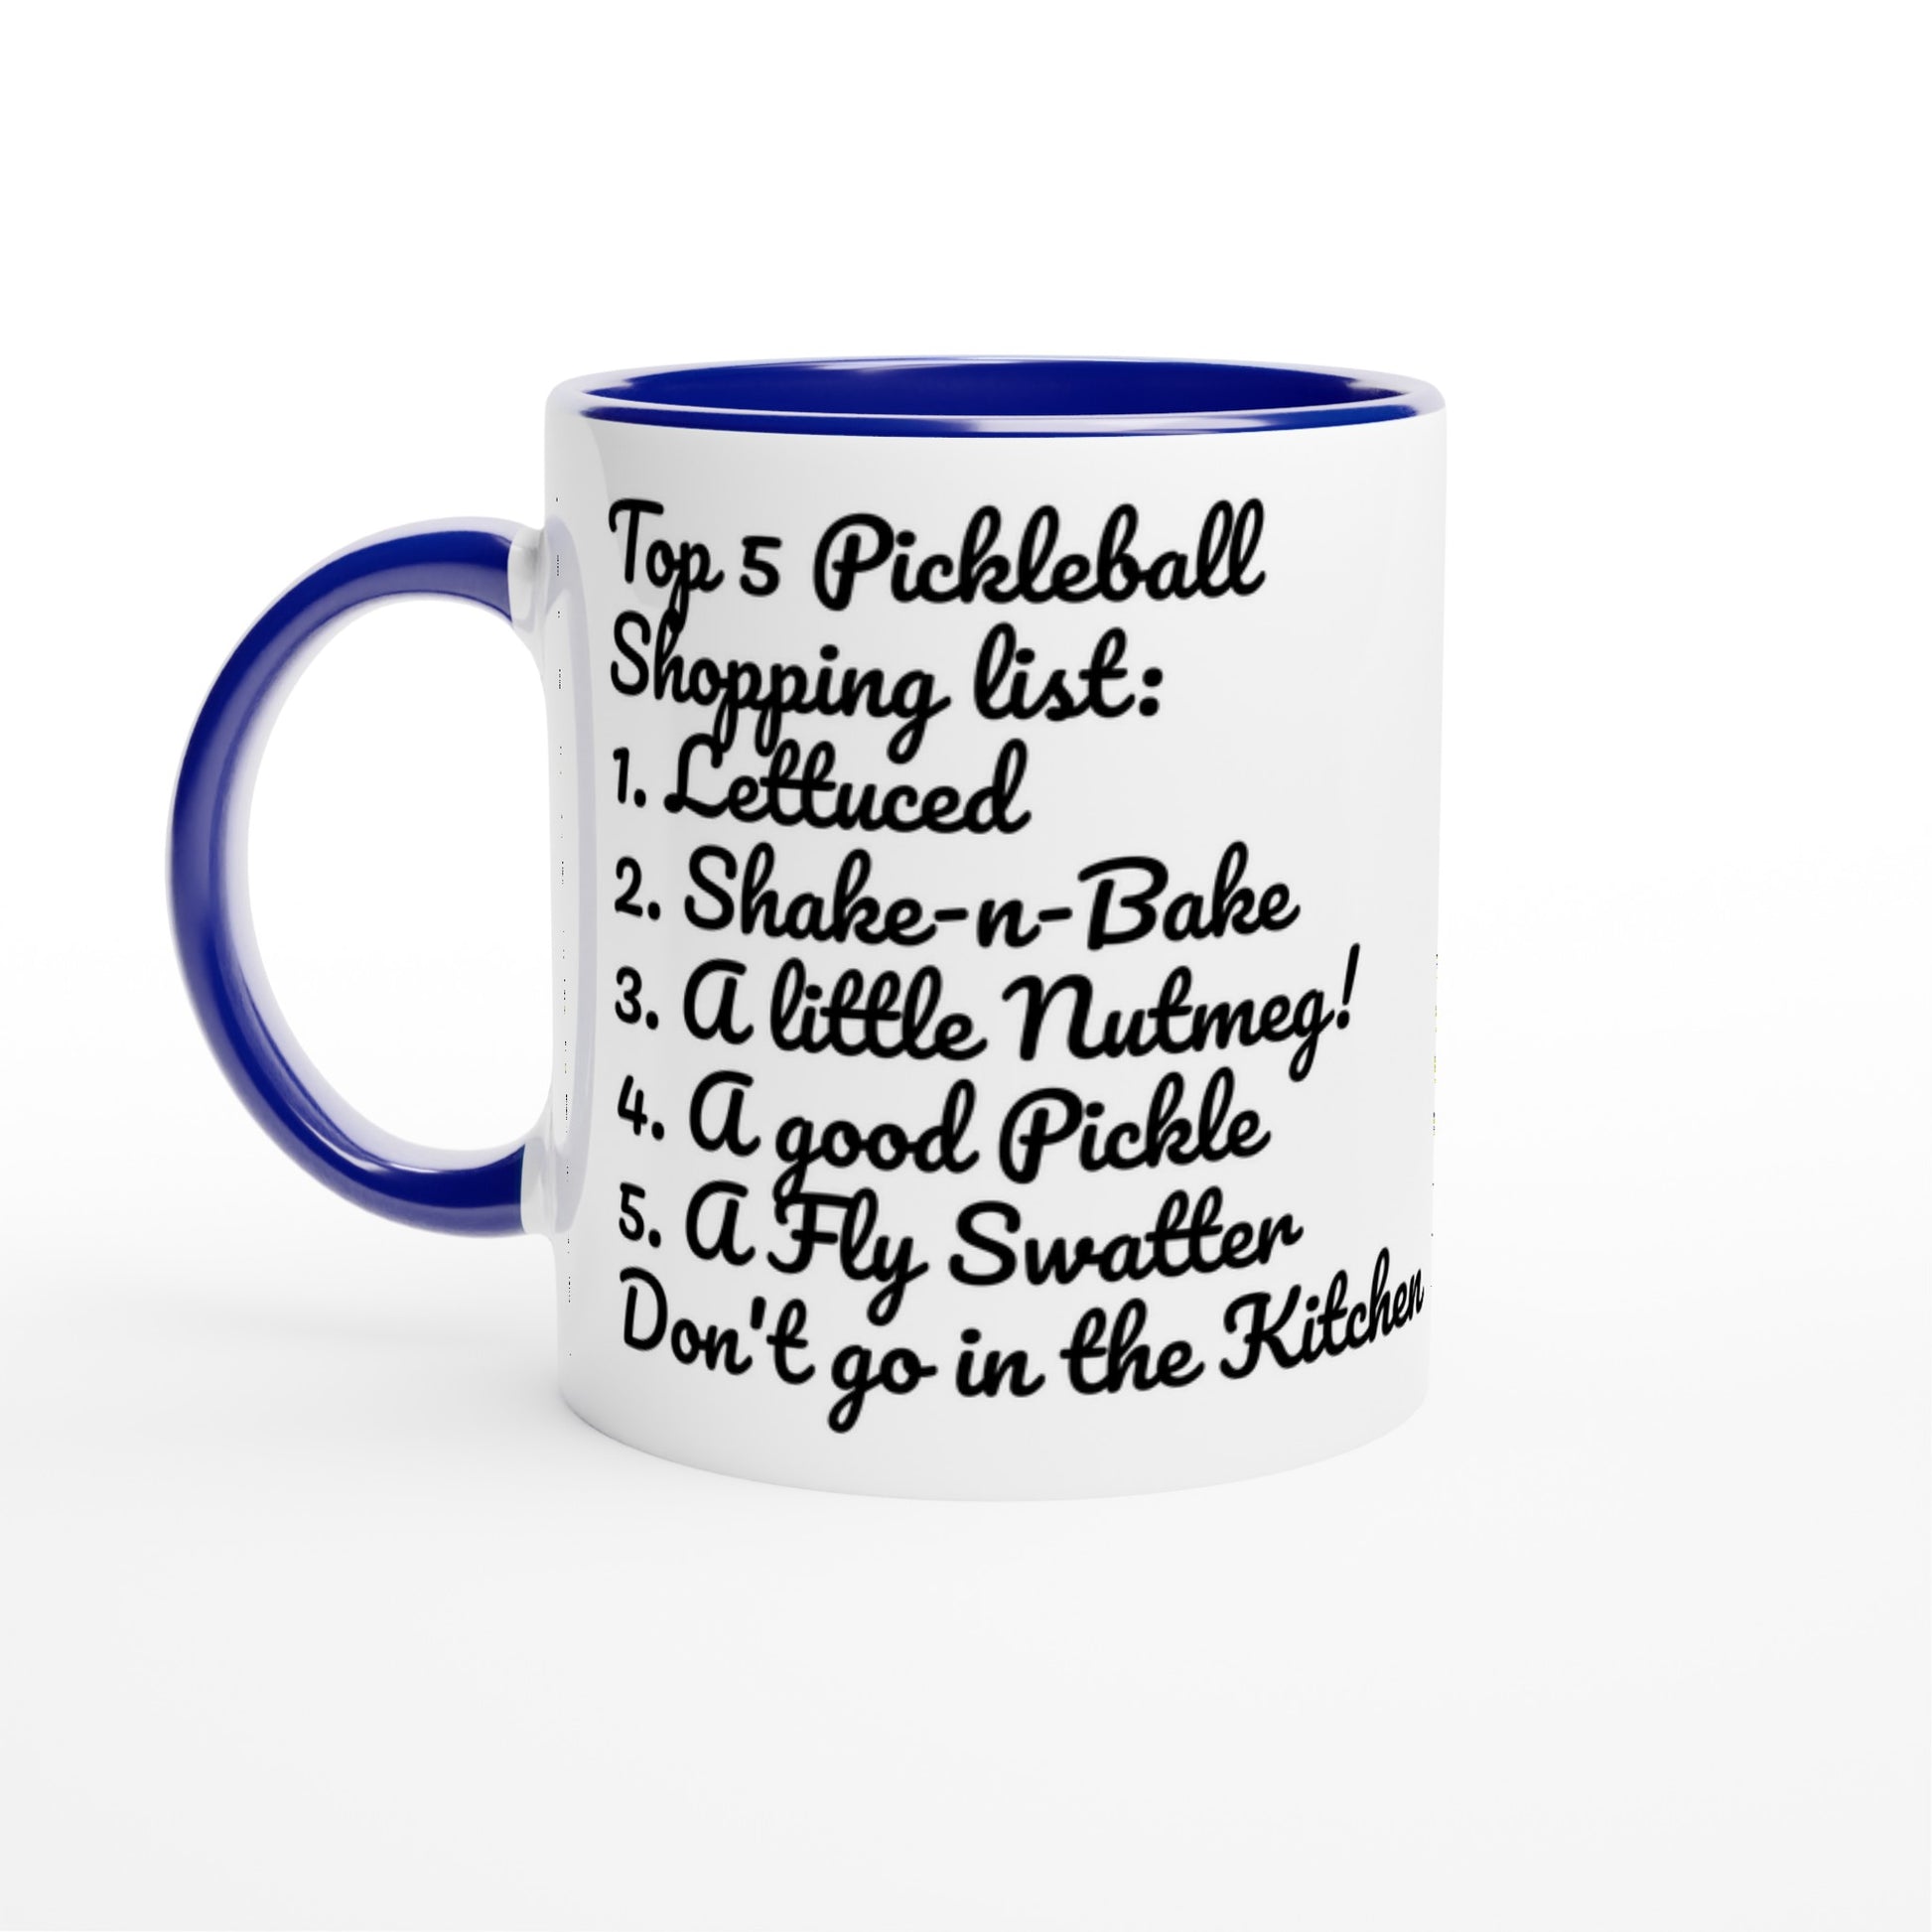 White ceramic 11oz mug with blue handle original motto Top 5 Pickleball Shopping list lettuce, Shake-n-bake, Nutmeg, Pickle, a Fly Swatter Don’t go in the kitchen front side and Let's Play PickleBall logo on back dishwasher and microwave safe ceramic coffee mug from WhatYa Say Apparel front view.